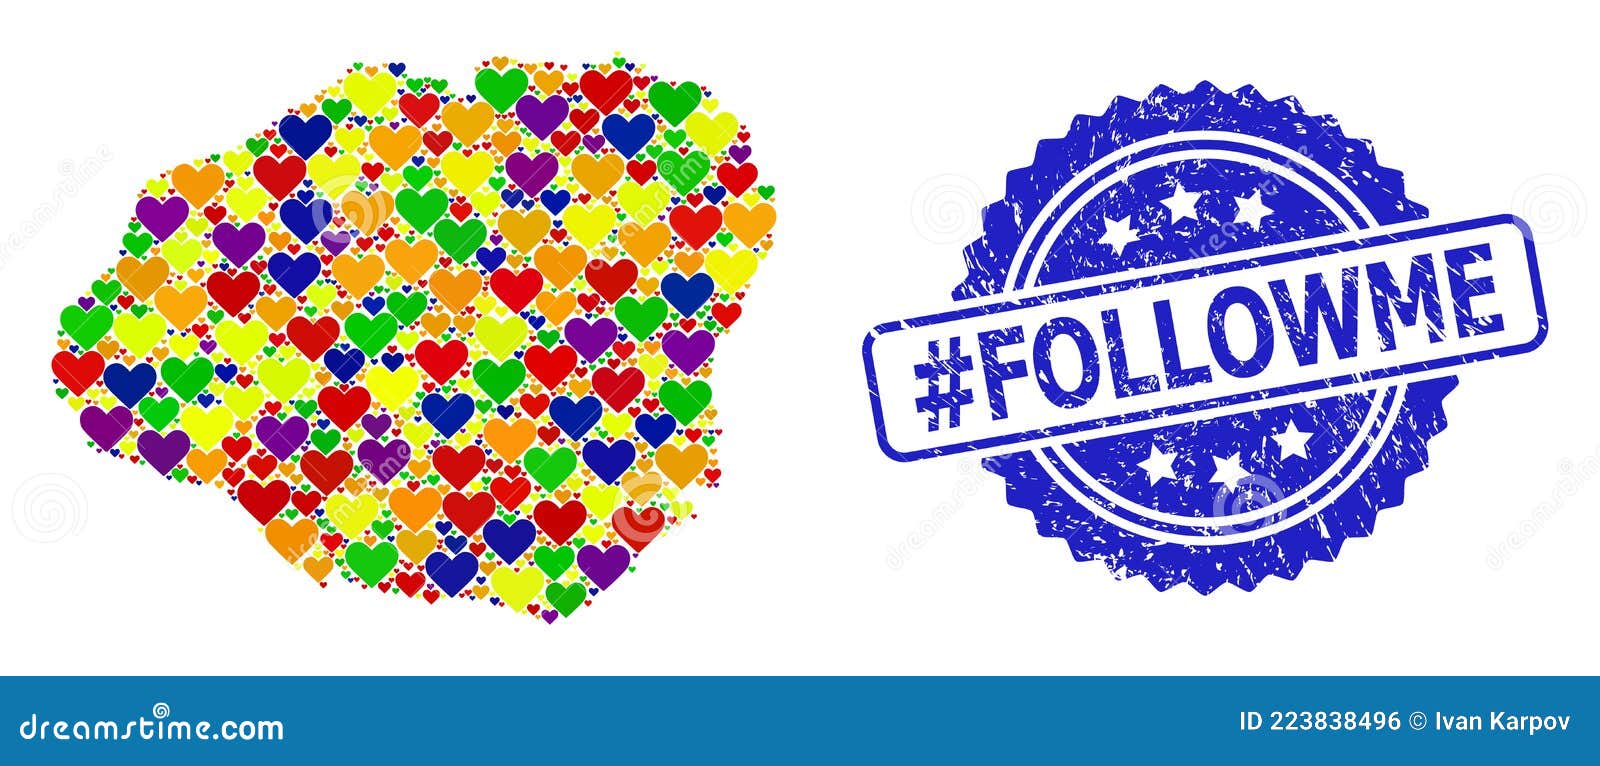 hashtag followme scratched badge and vibrant heart mosaic map of kauai island for lgbt